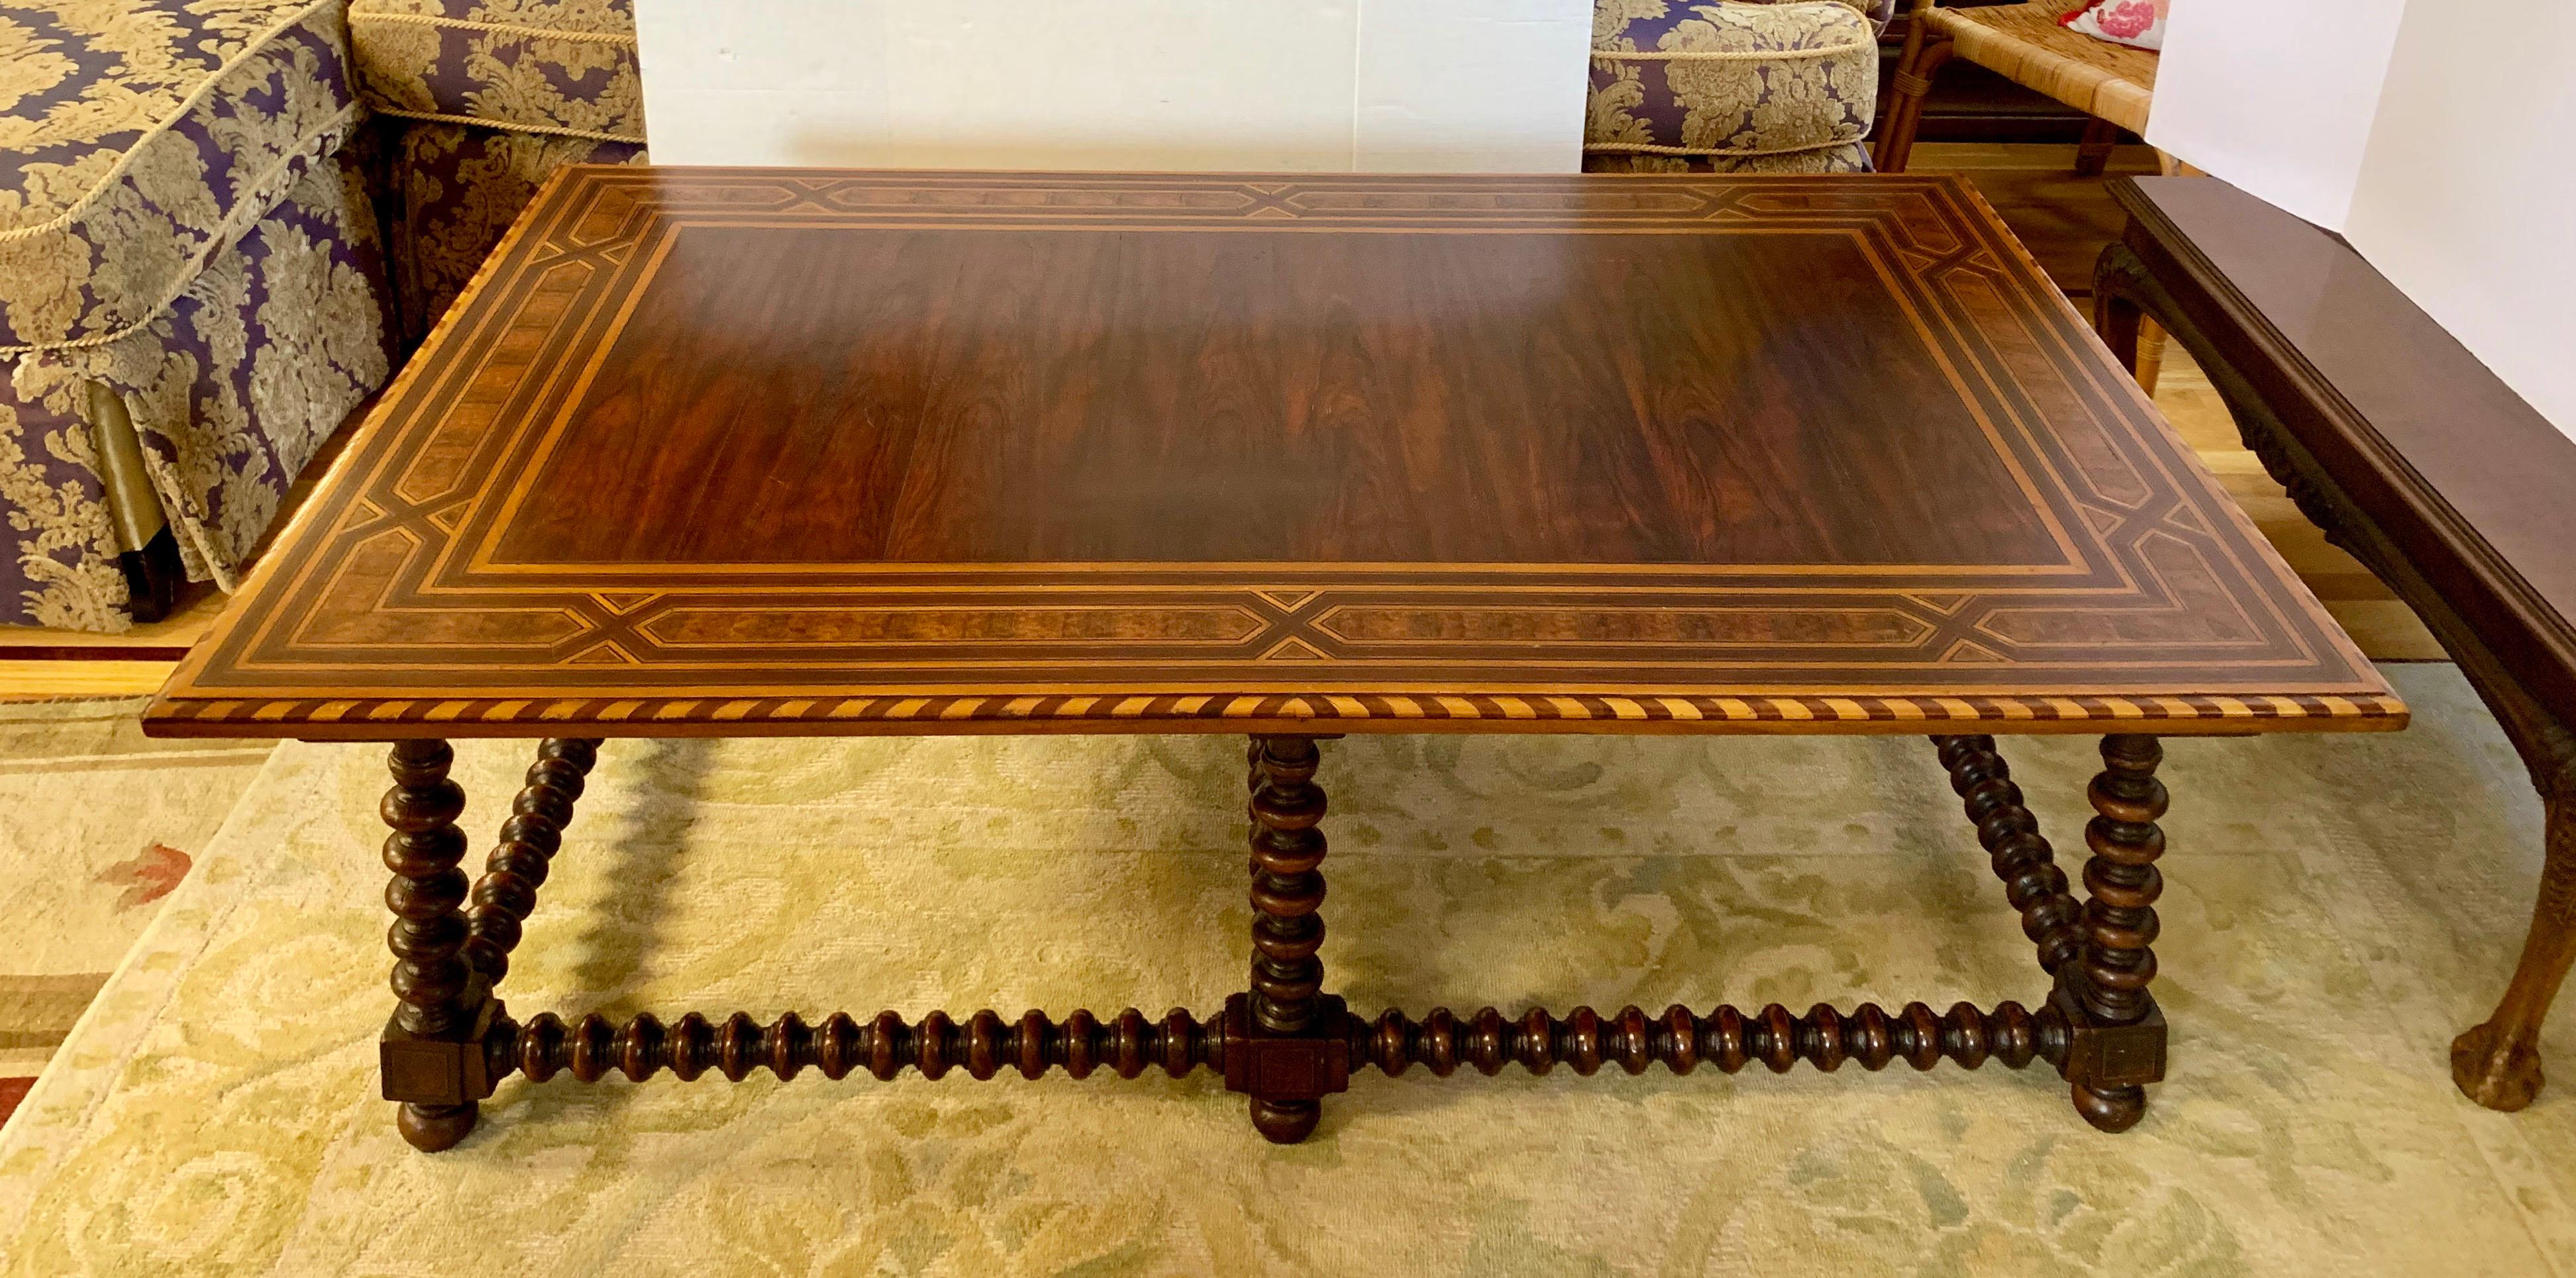 Finely handcrafted and masterfully inlaid large coffee table by Alfonso Marina of Mexico. It features perfectly executed inlaid wood patterns and barley twist legs and stretchers.